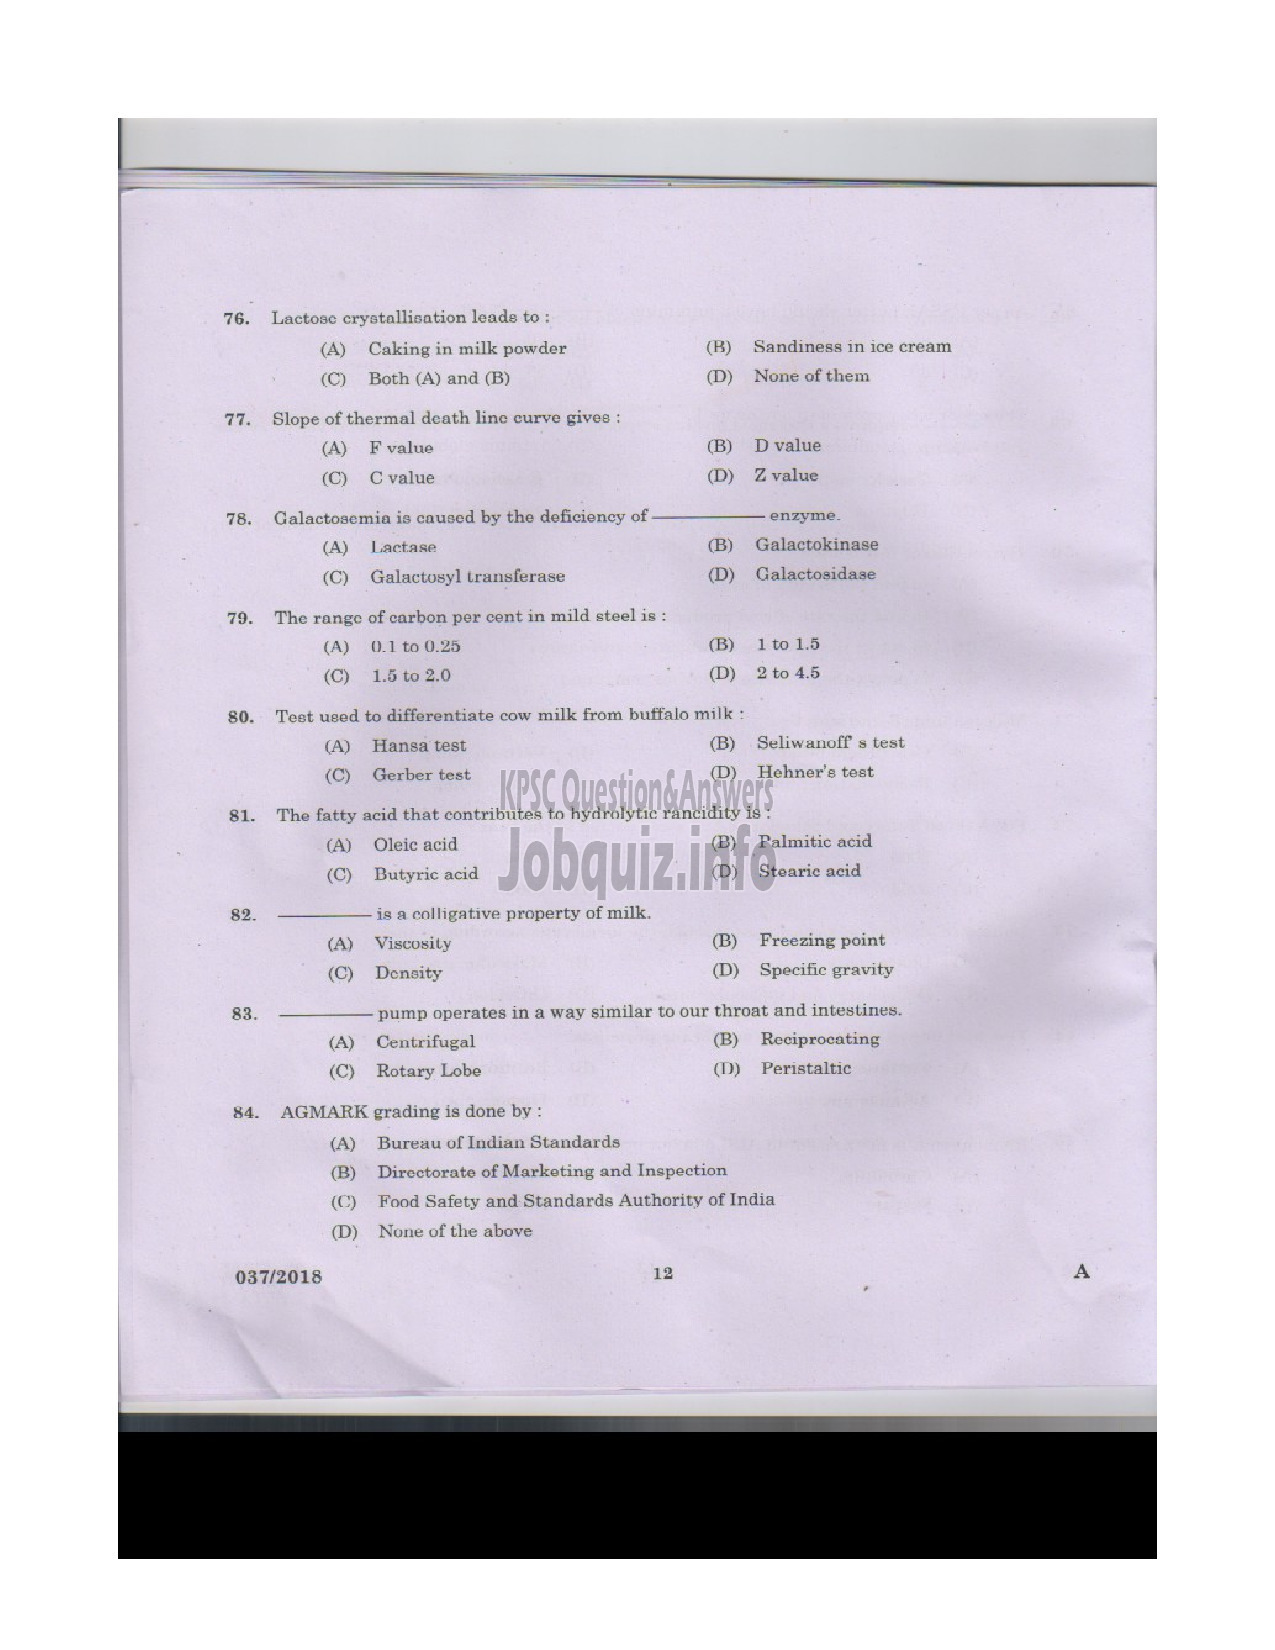 Kerala PSC Question Paper - VOCATIONAL INSTRUCTOR IN DAIRYING MILK PRODUCTS VHSE-11